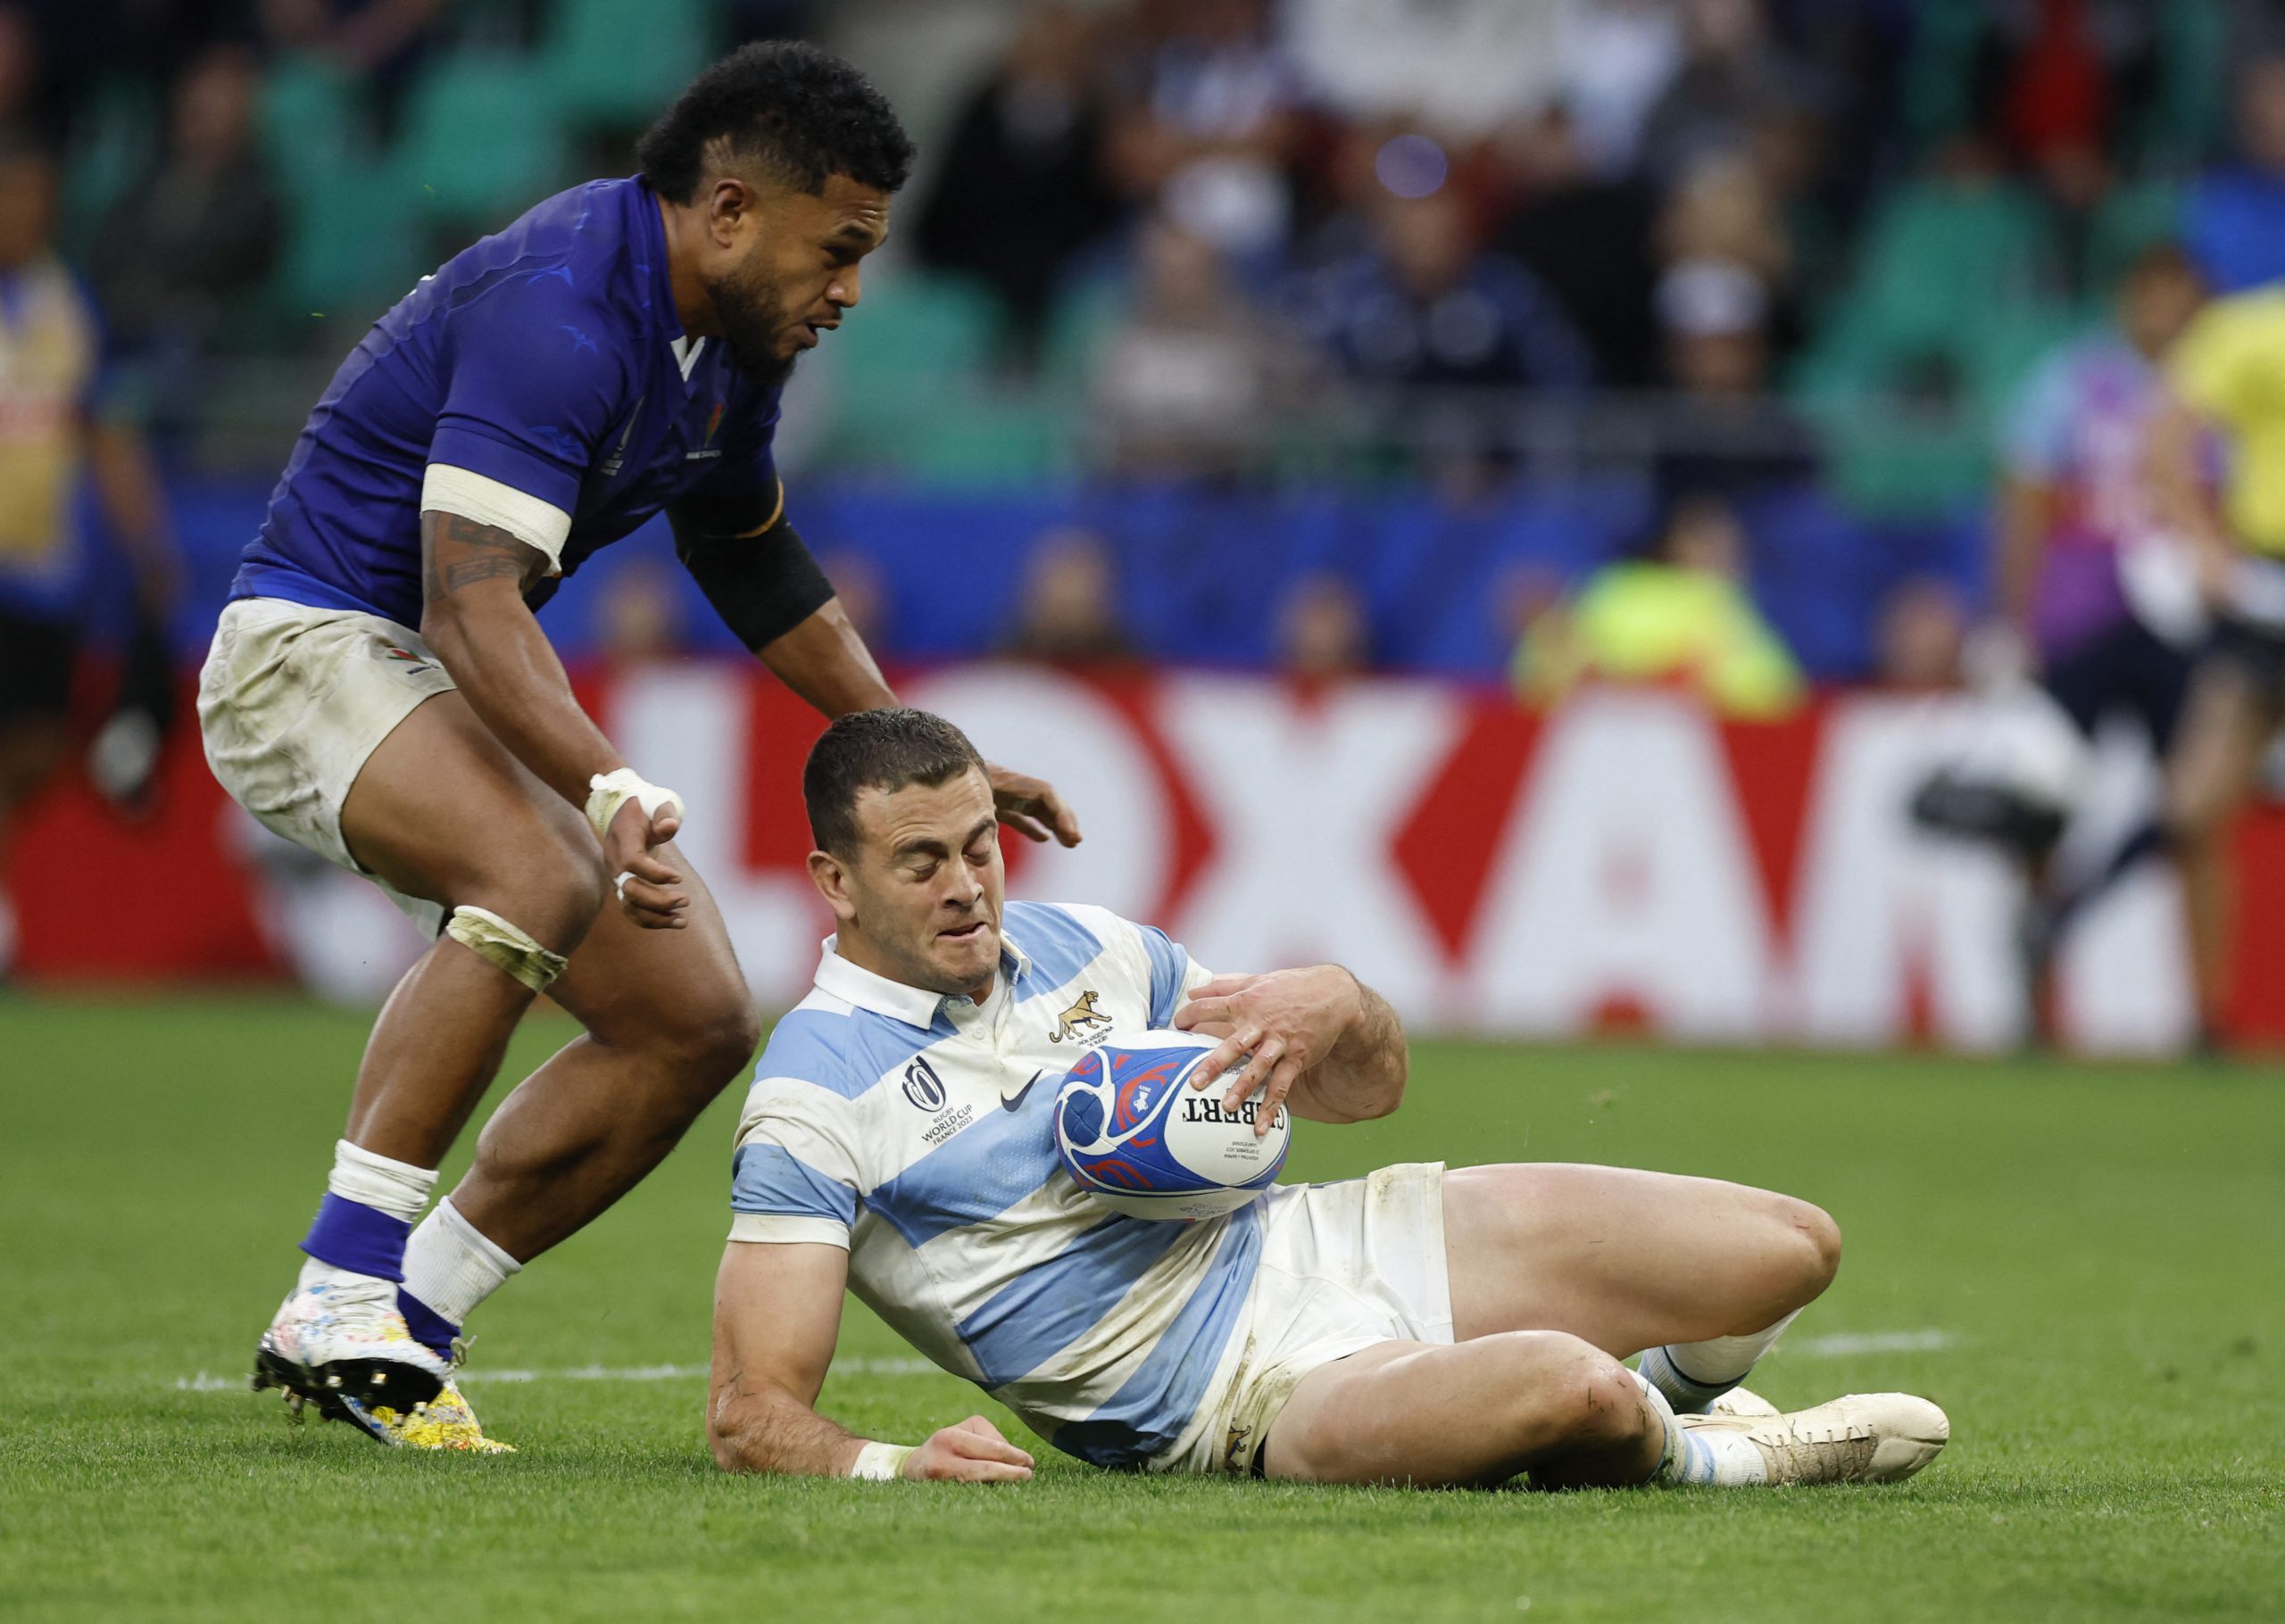 Rugby Union - Rugby World Cup 2023 - Pool D - Argentina v Samoa - Stade Geoffroy-Guichard, Saint-Etienne, France - September 22, 2023 Samoa's Tumua Manu in action with Argentina's Emiliano Boffelli 